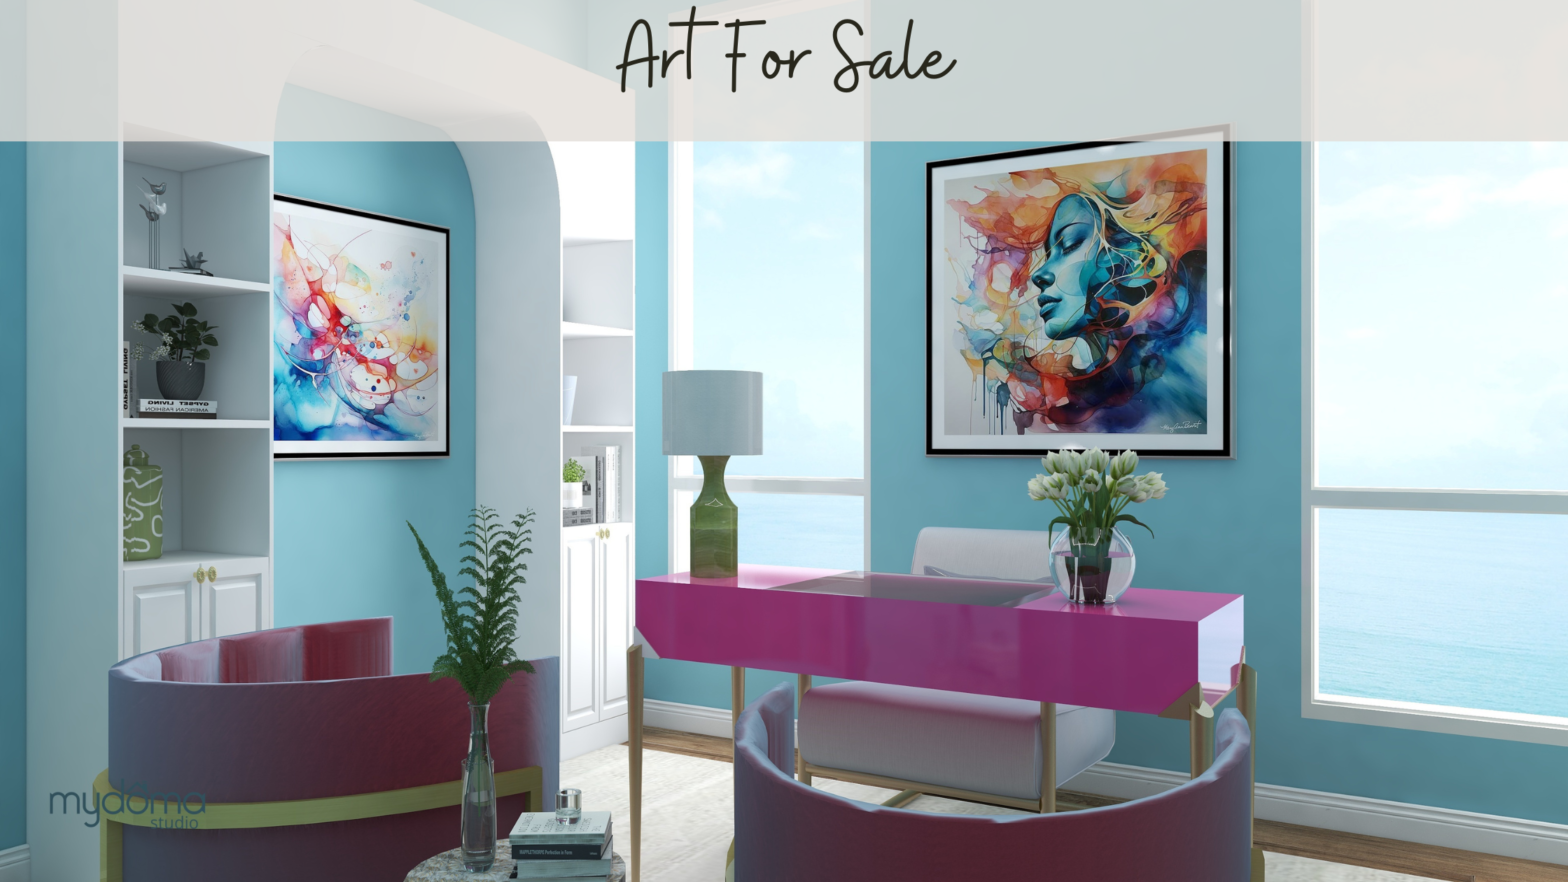 Art for Sale by Mary Ann Benoit of Northern Lights Home Staging and Design